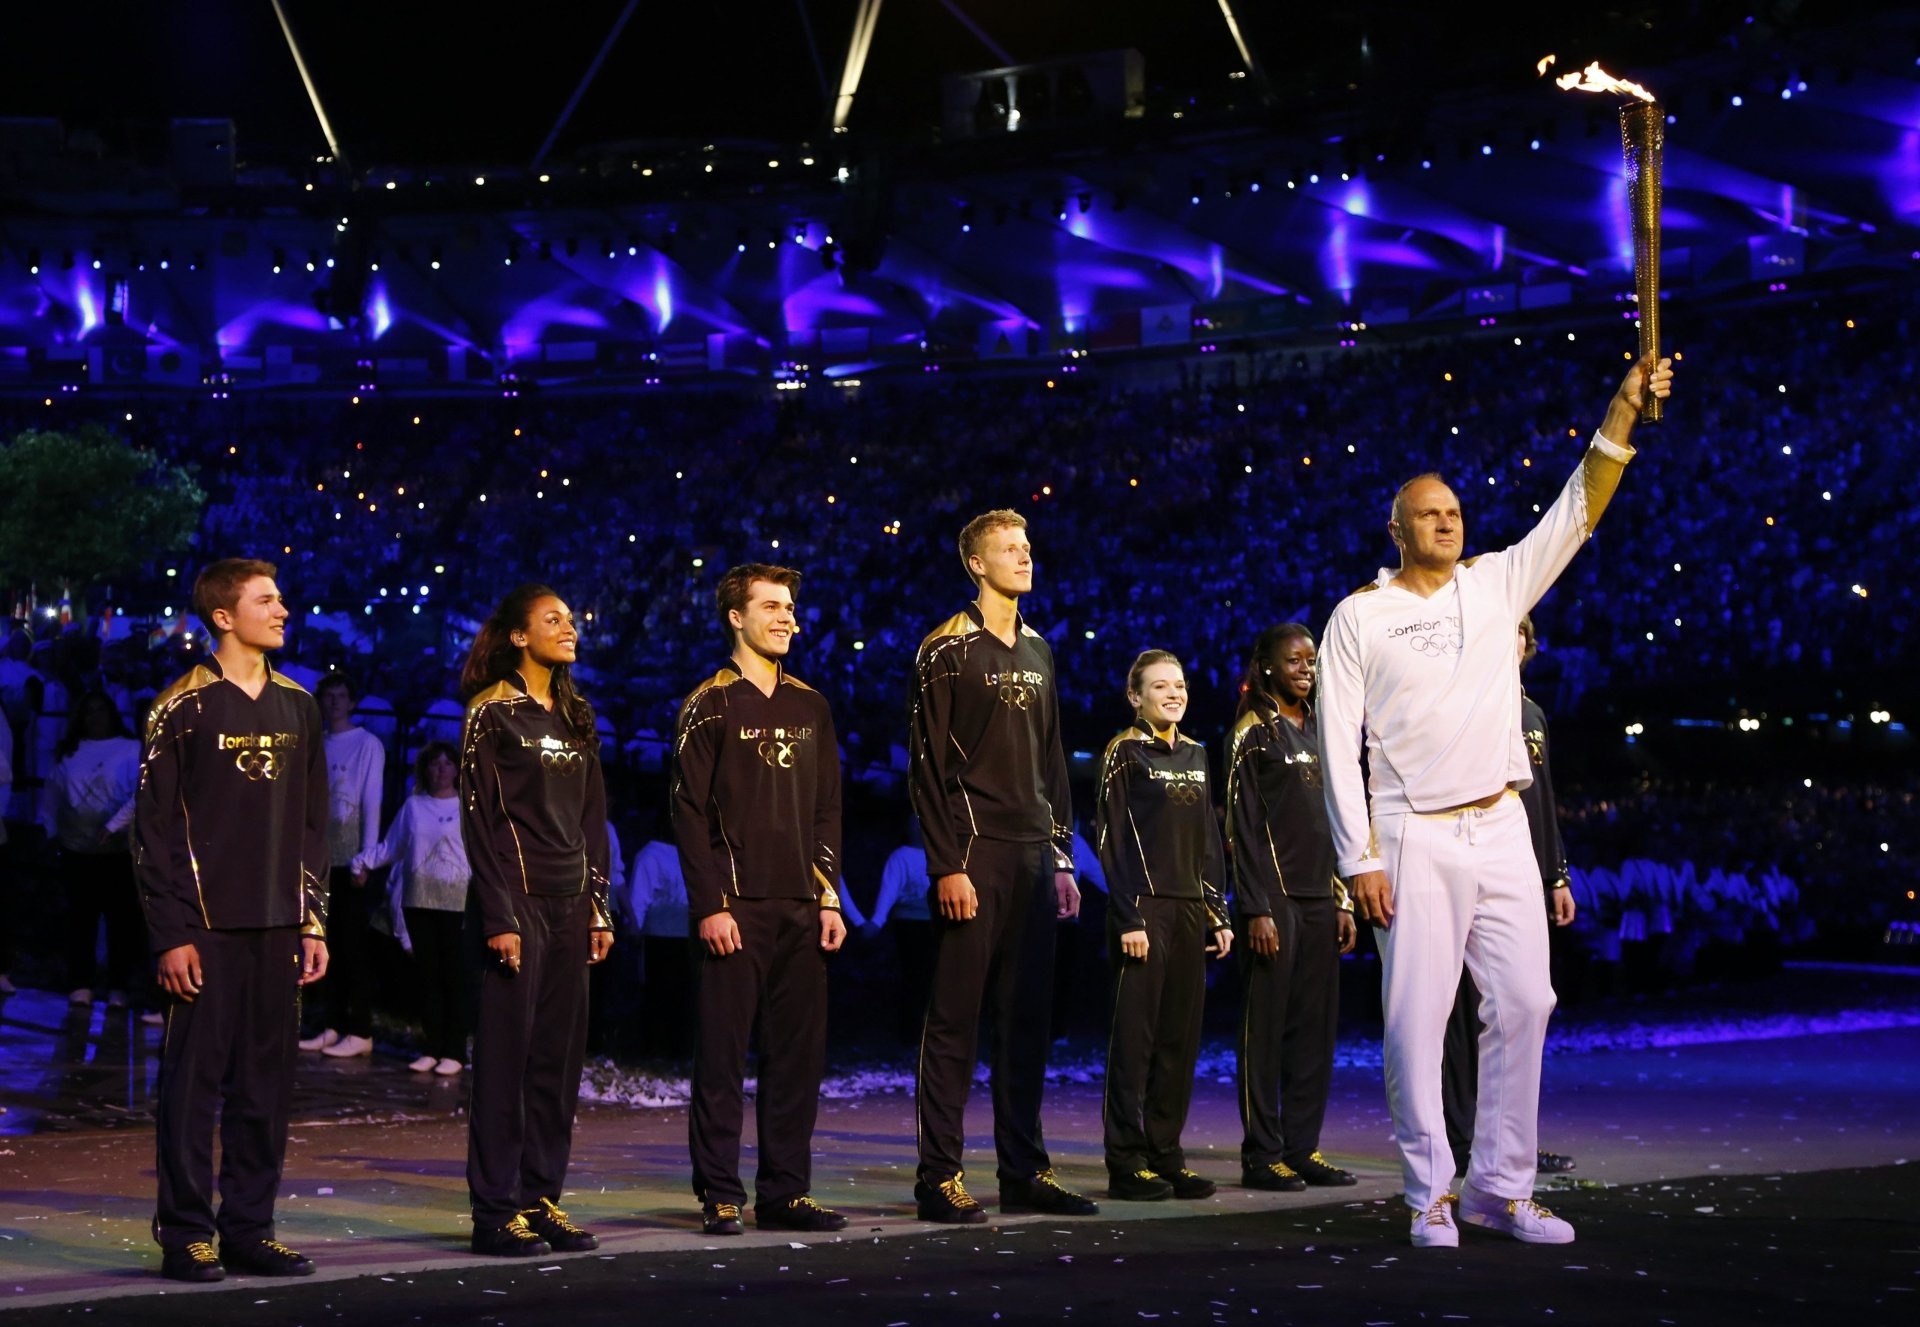 Olympic Flame: Steve Redgrave, The Opening Ceremony, 2012 Summer Olympics, London. 1920x1330 HD Wallpaper.